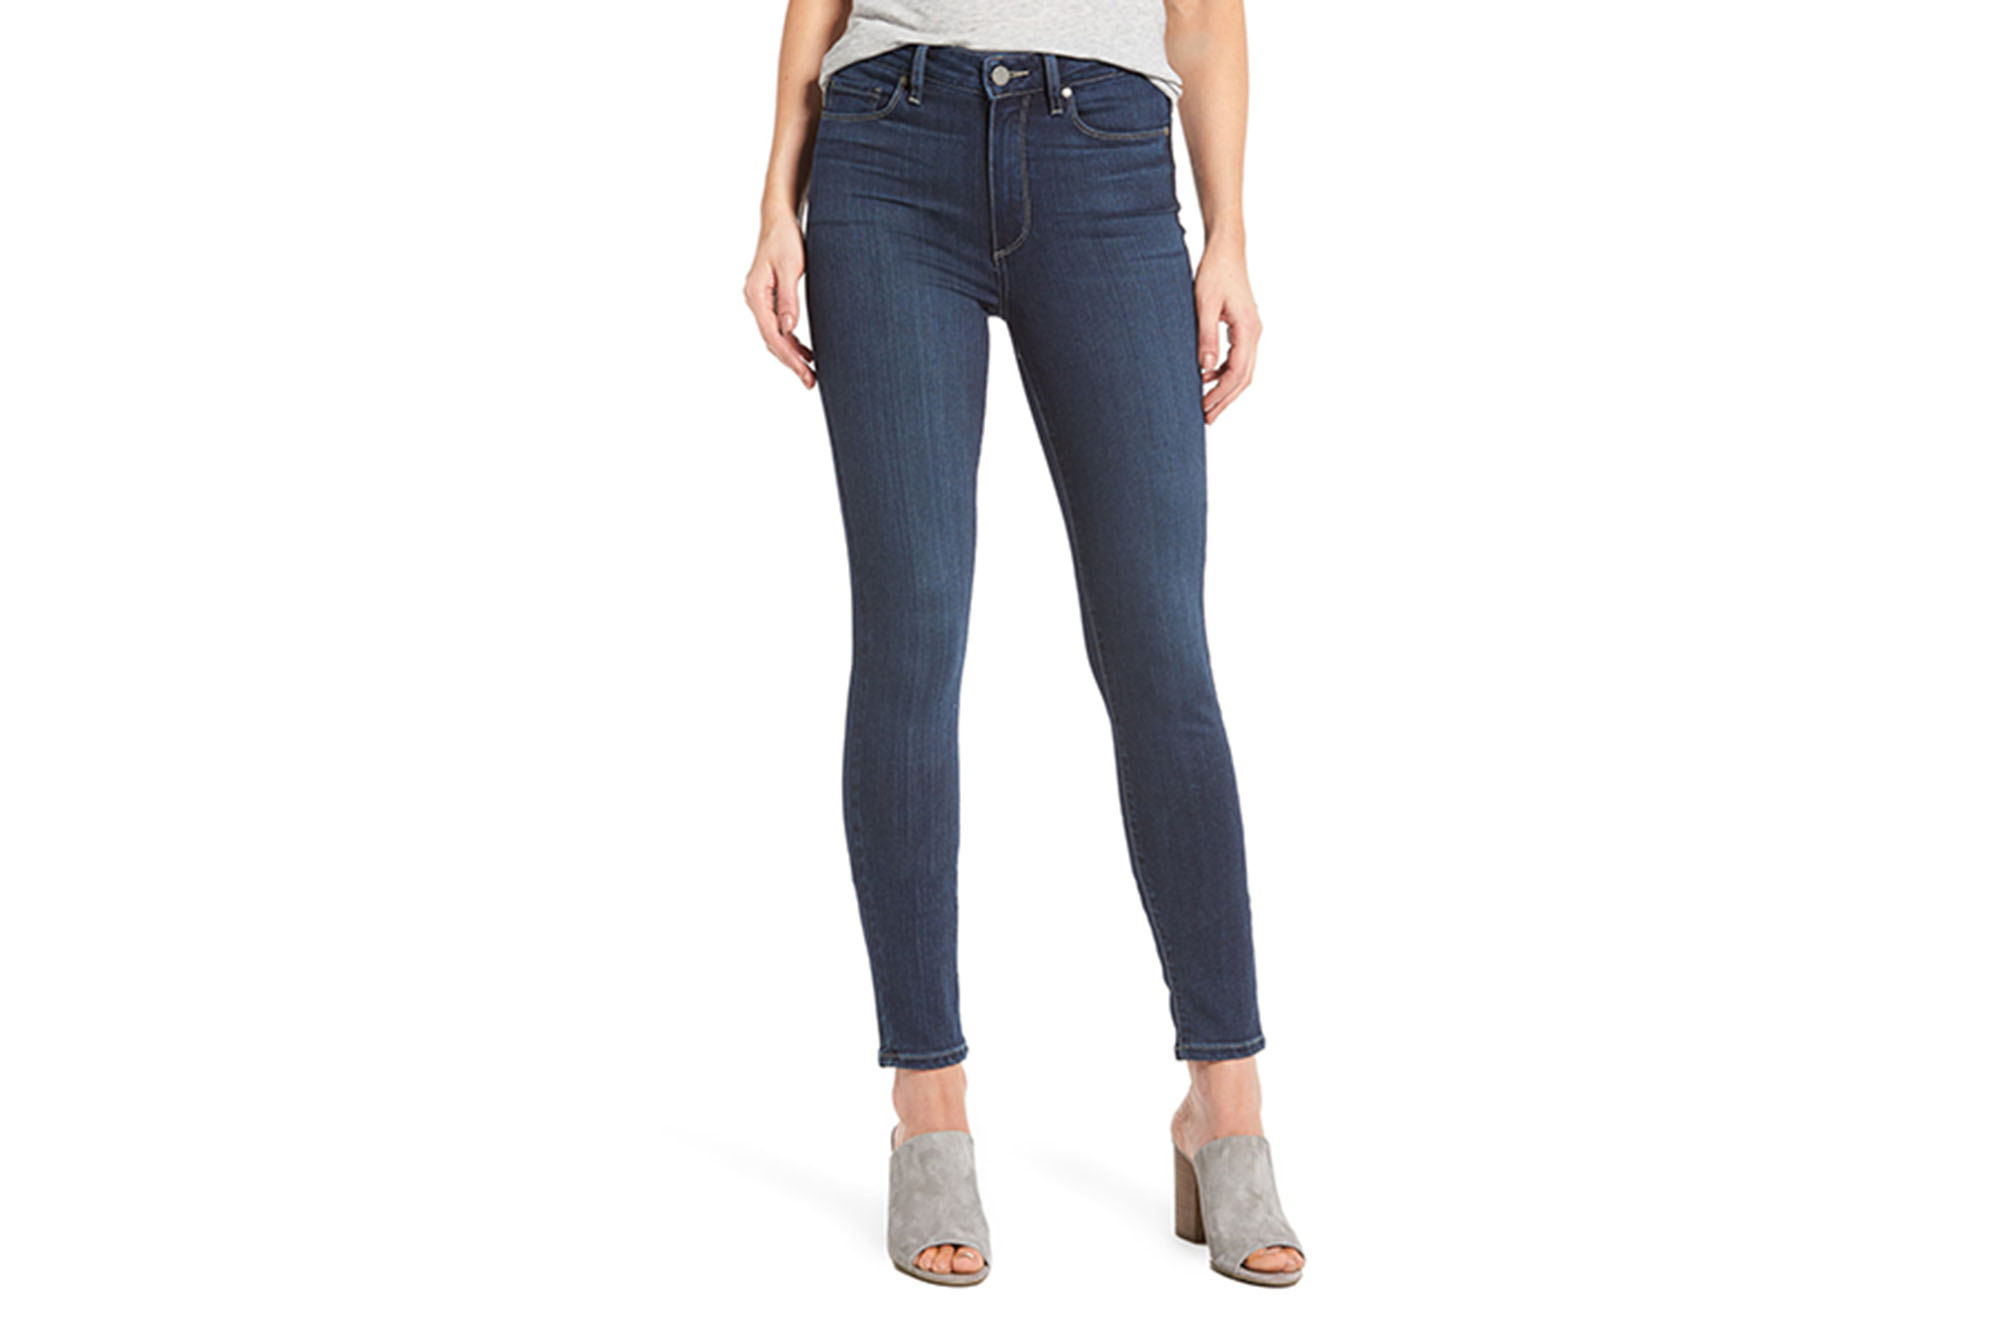 We Found the Best Black Friday Deal on Jeans at Nordstrom